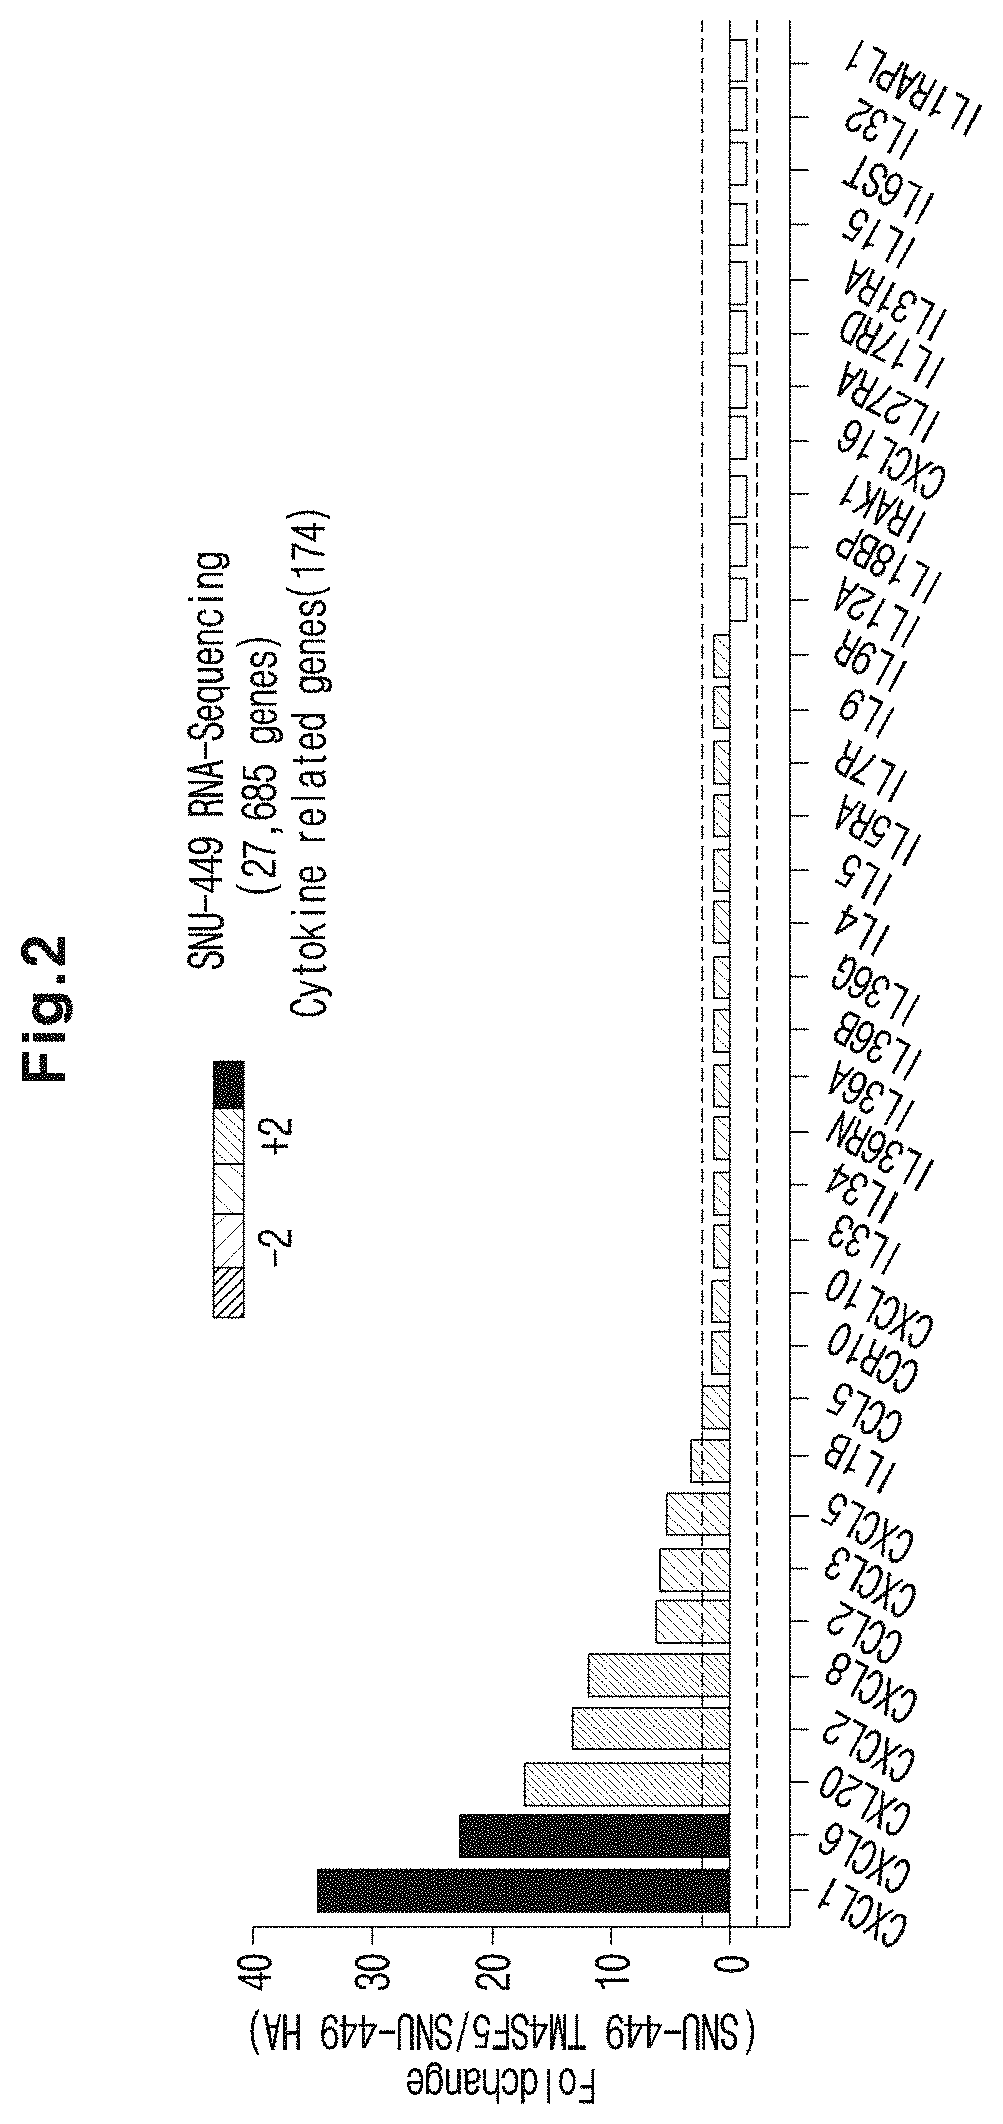 Immunosuppressant Comprising TSAHC or a Pharmaceutically Acceptable Salts Thereof as an Active Ingredient